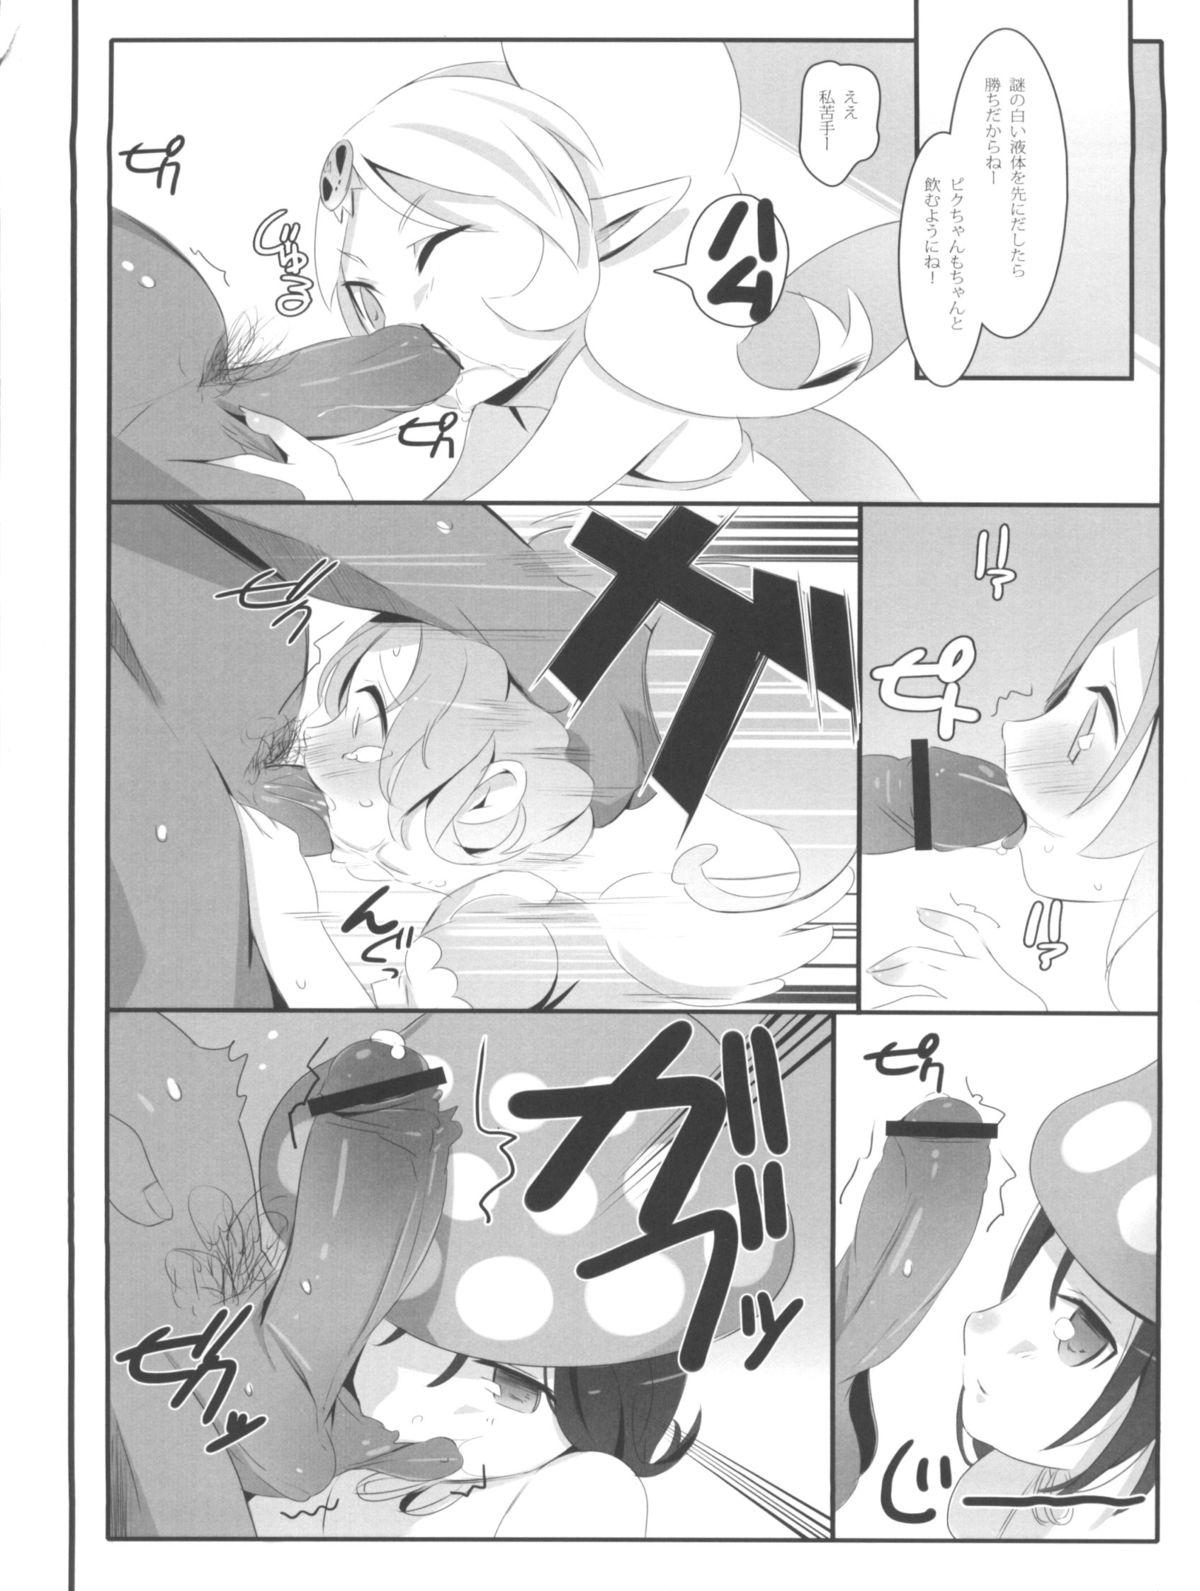 Reverse Cowgirl gdgdsHA MISETA - Gdgd fairies Trap - Page 11